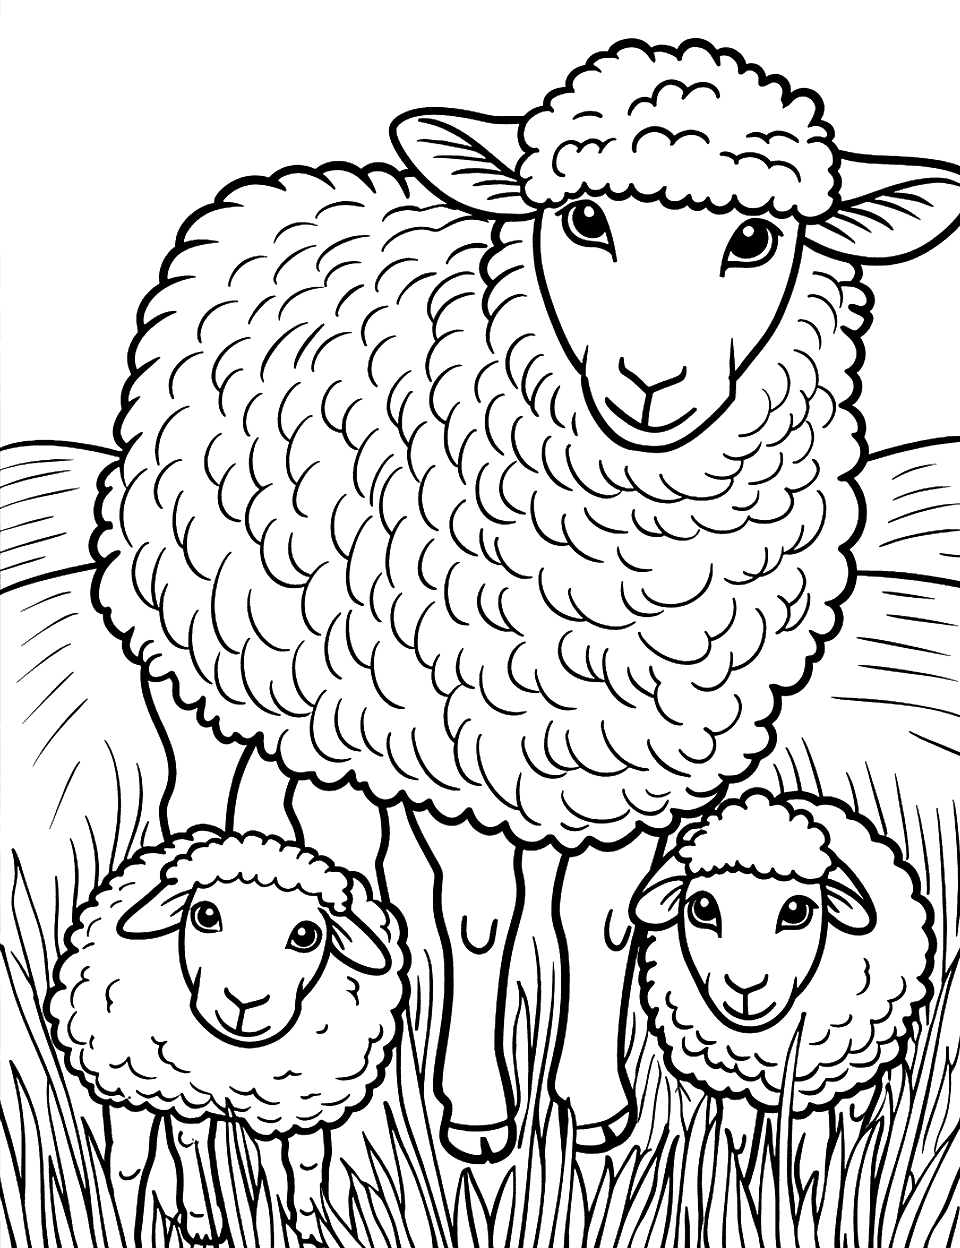 Mother Sheep with Lambs Coloring Page - A mother sheep watching over her playful lambs in a lush grass field.